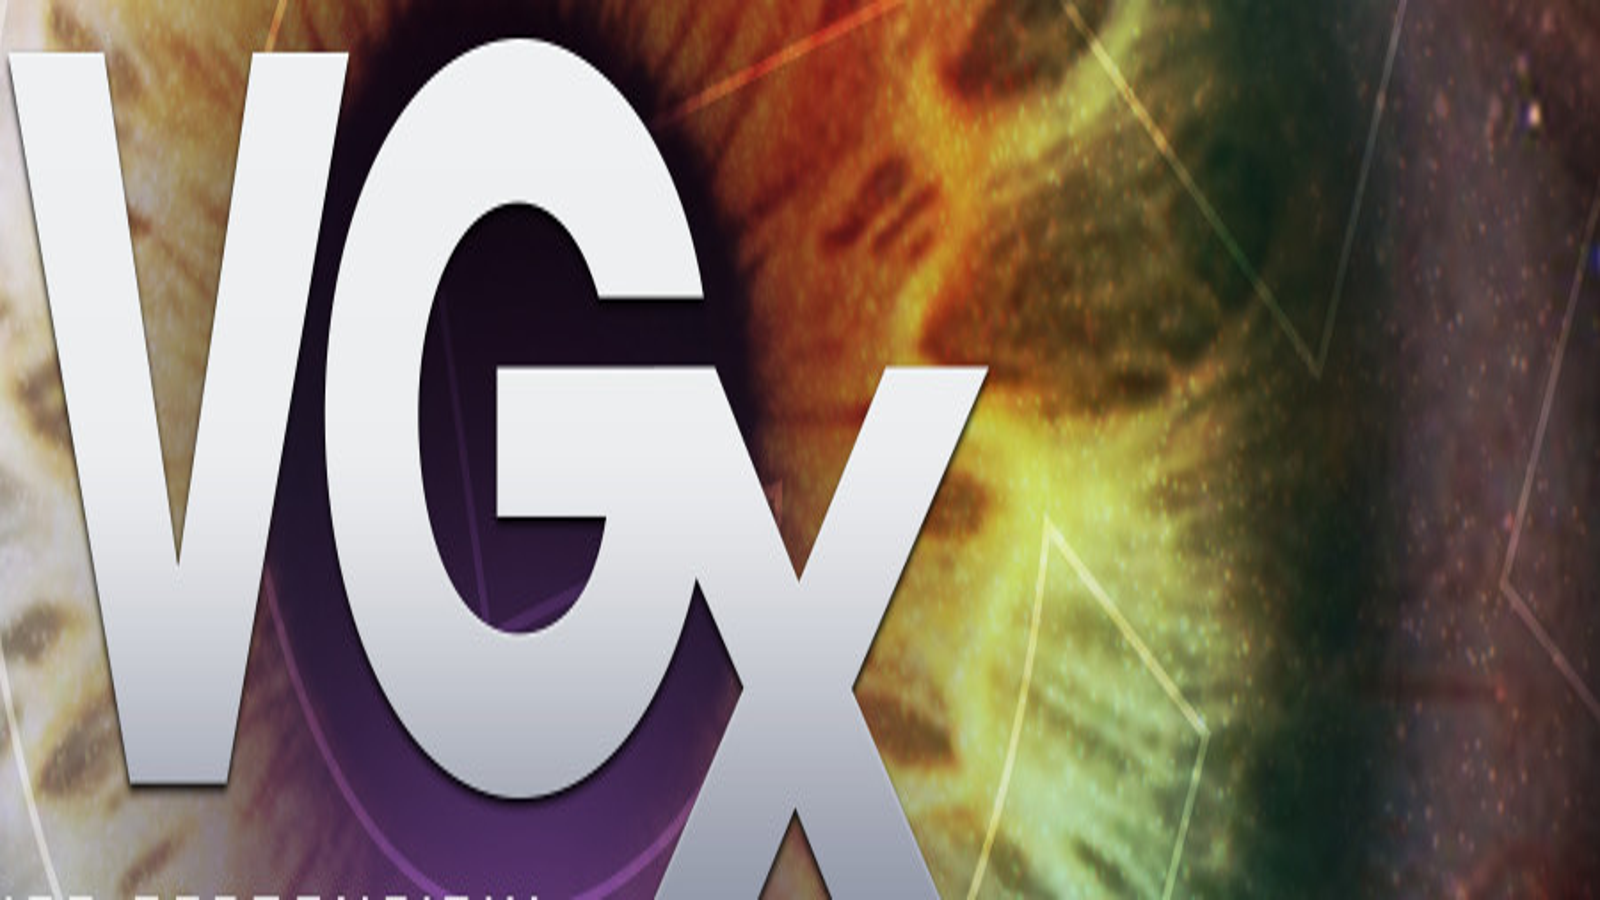 Spike VGX 2013 award nominees announced - Polygon